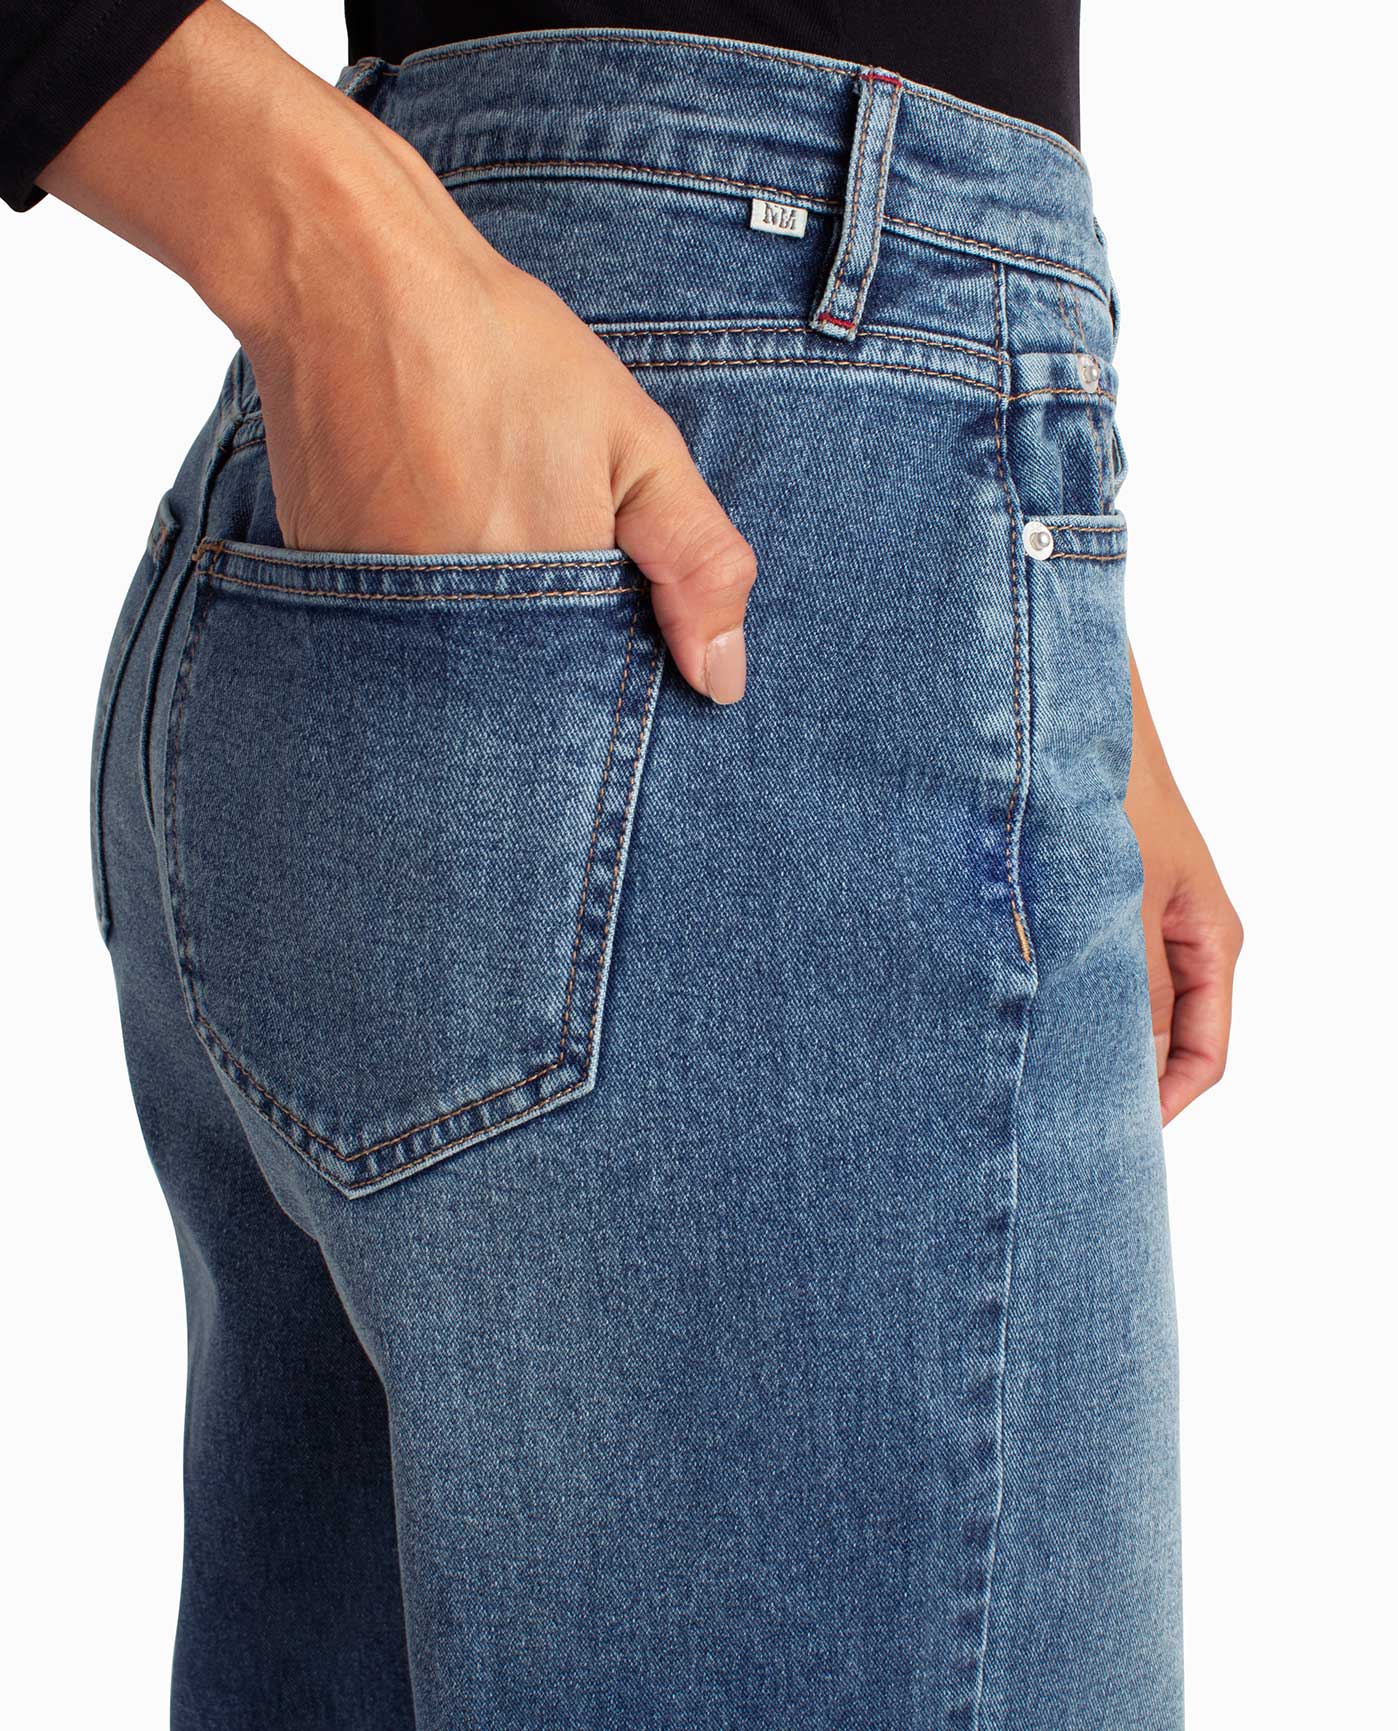 SIDE OF HUDSON YARDS MID RISE WIDE LEG JEAN AND HAND IN POCKET | Dark Blue